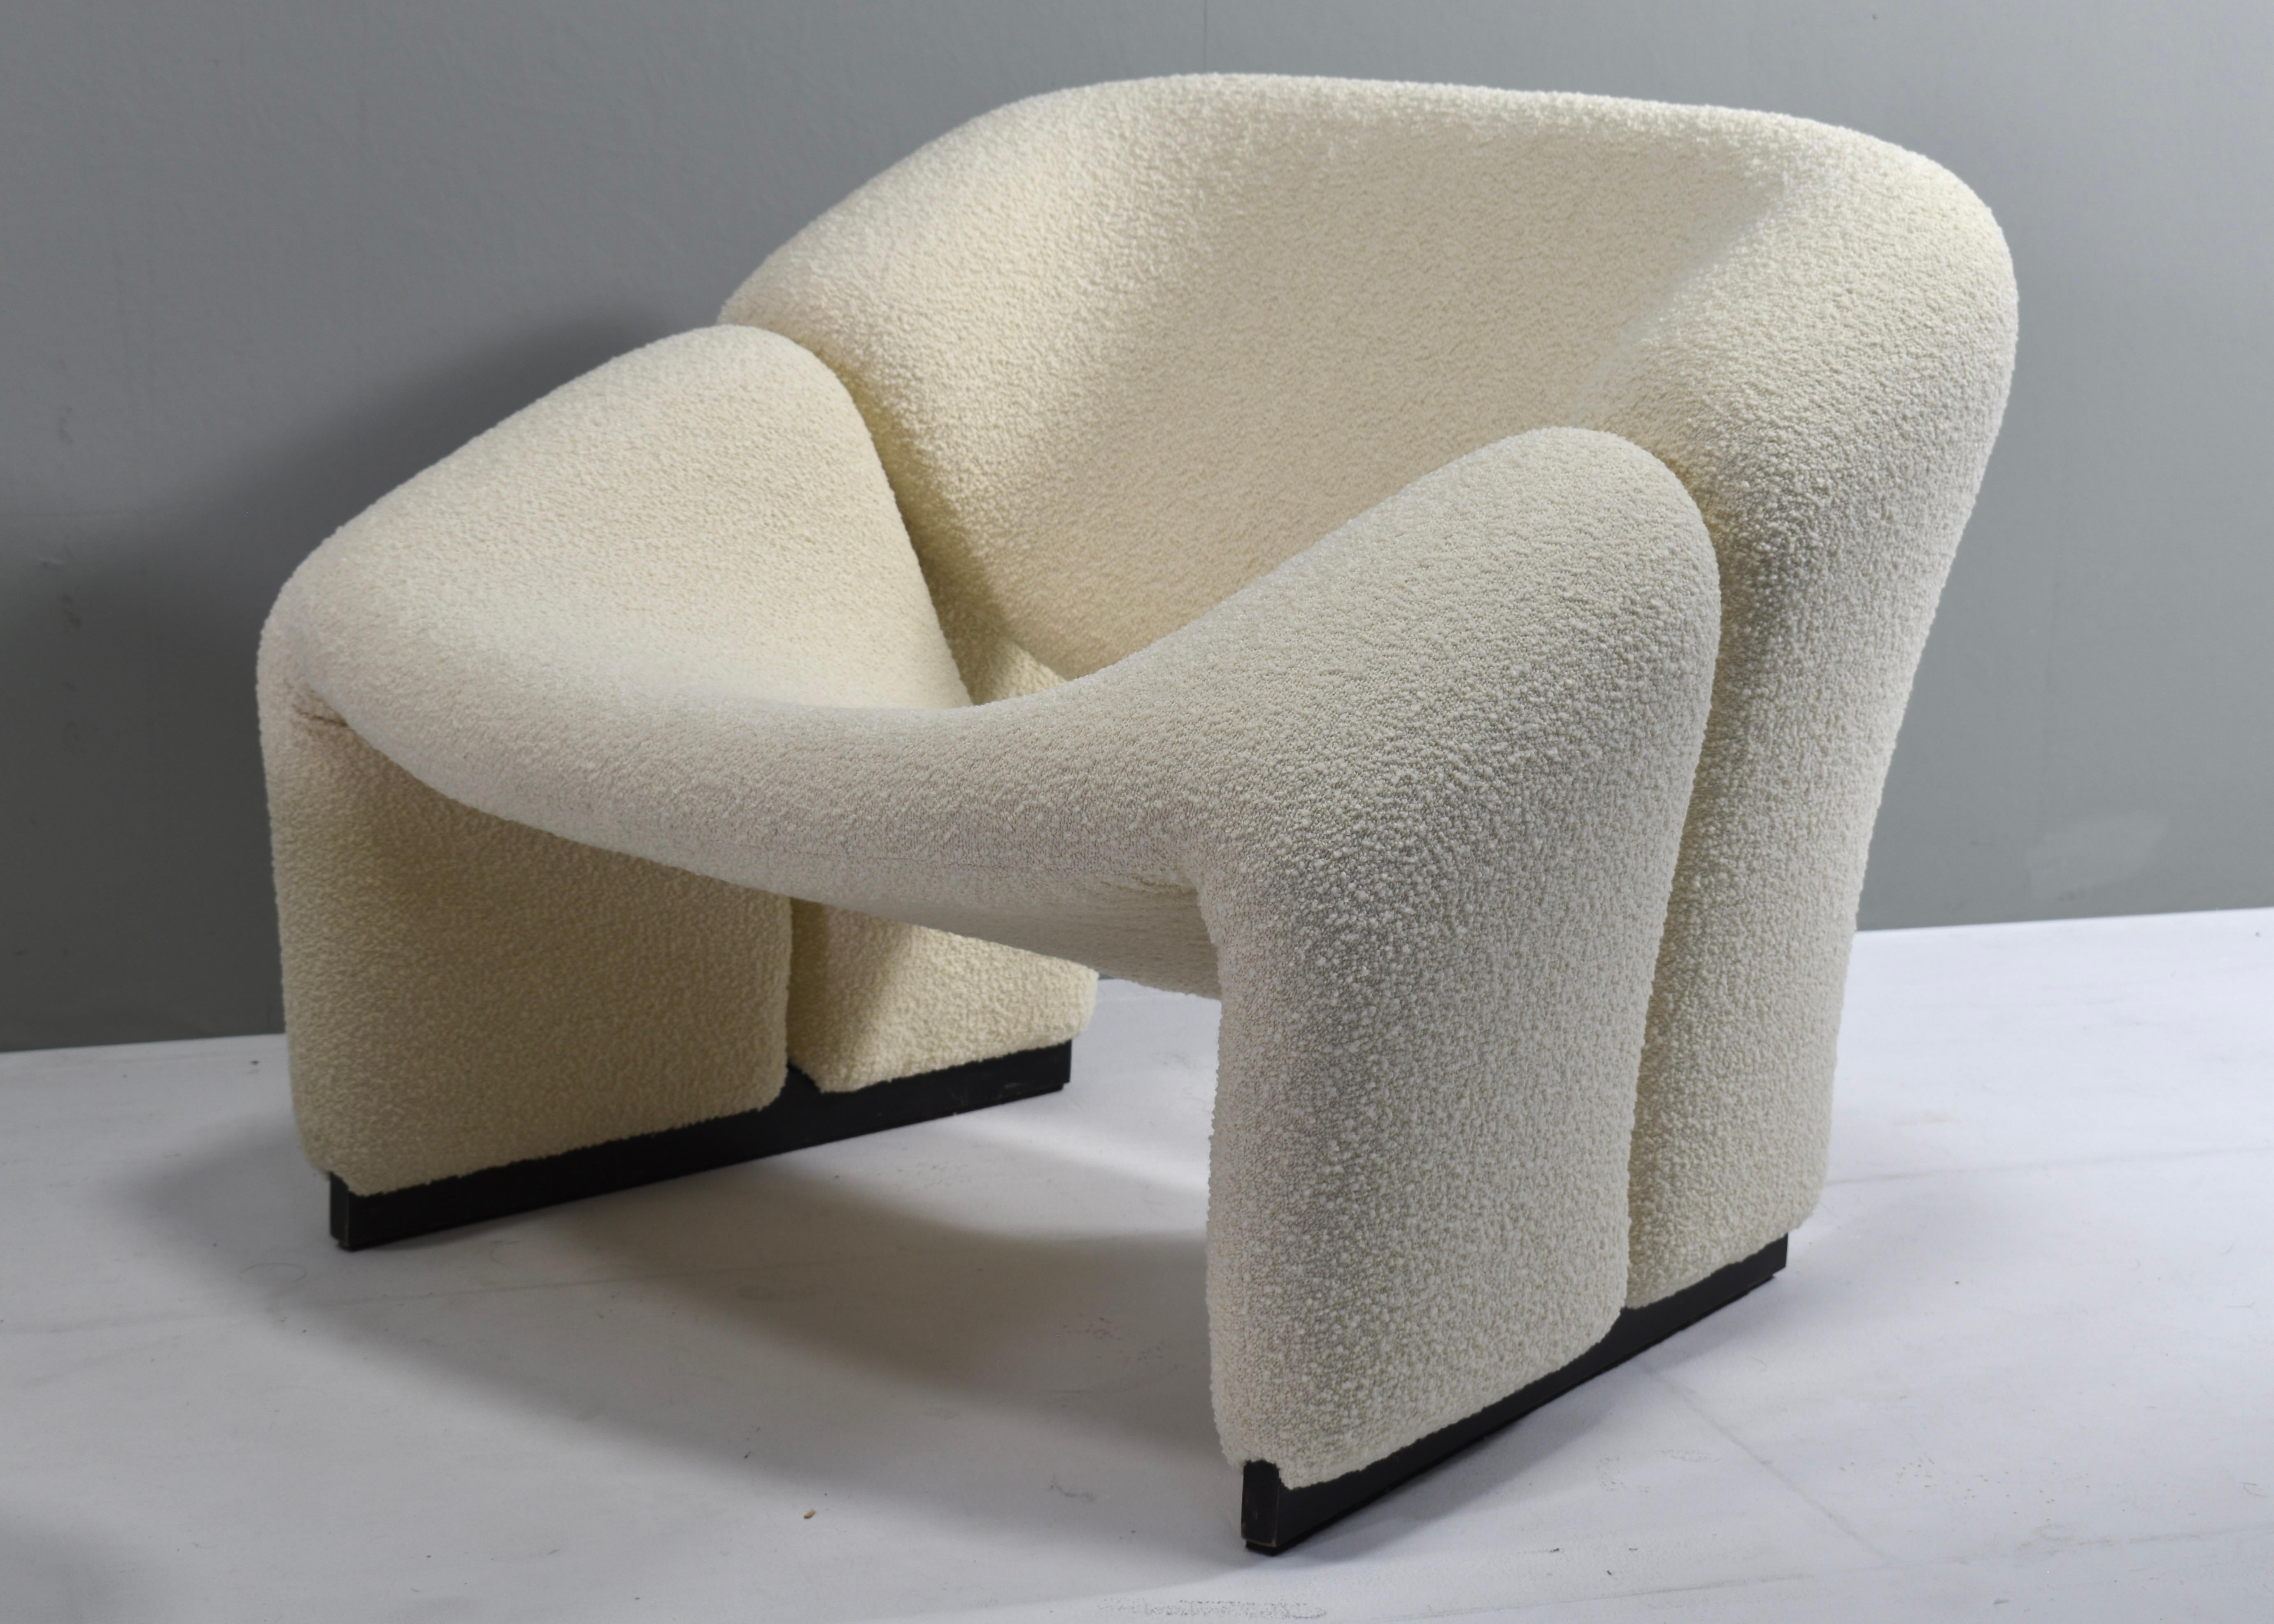 Pair of 1st Edition Pierre Paulin F580 Groovy Chairs by Artifort, 1966 For Sale 2